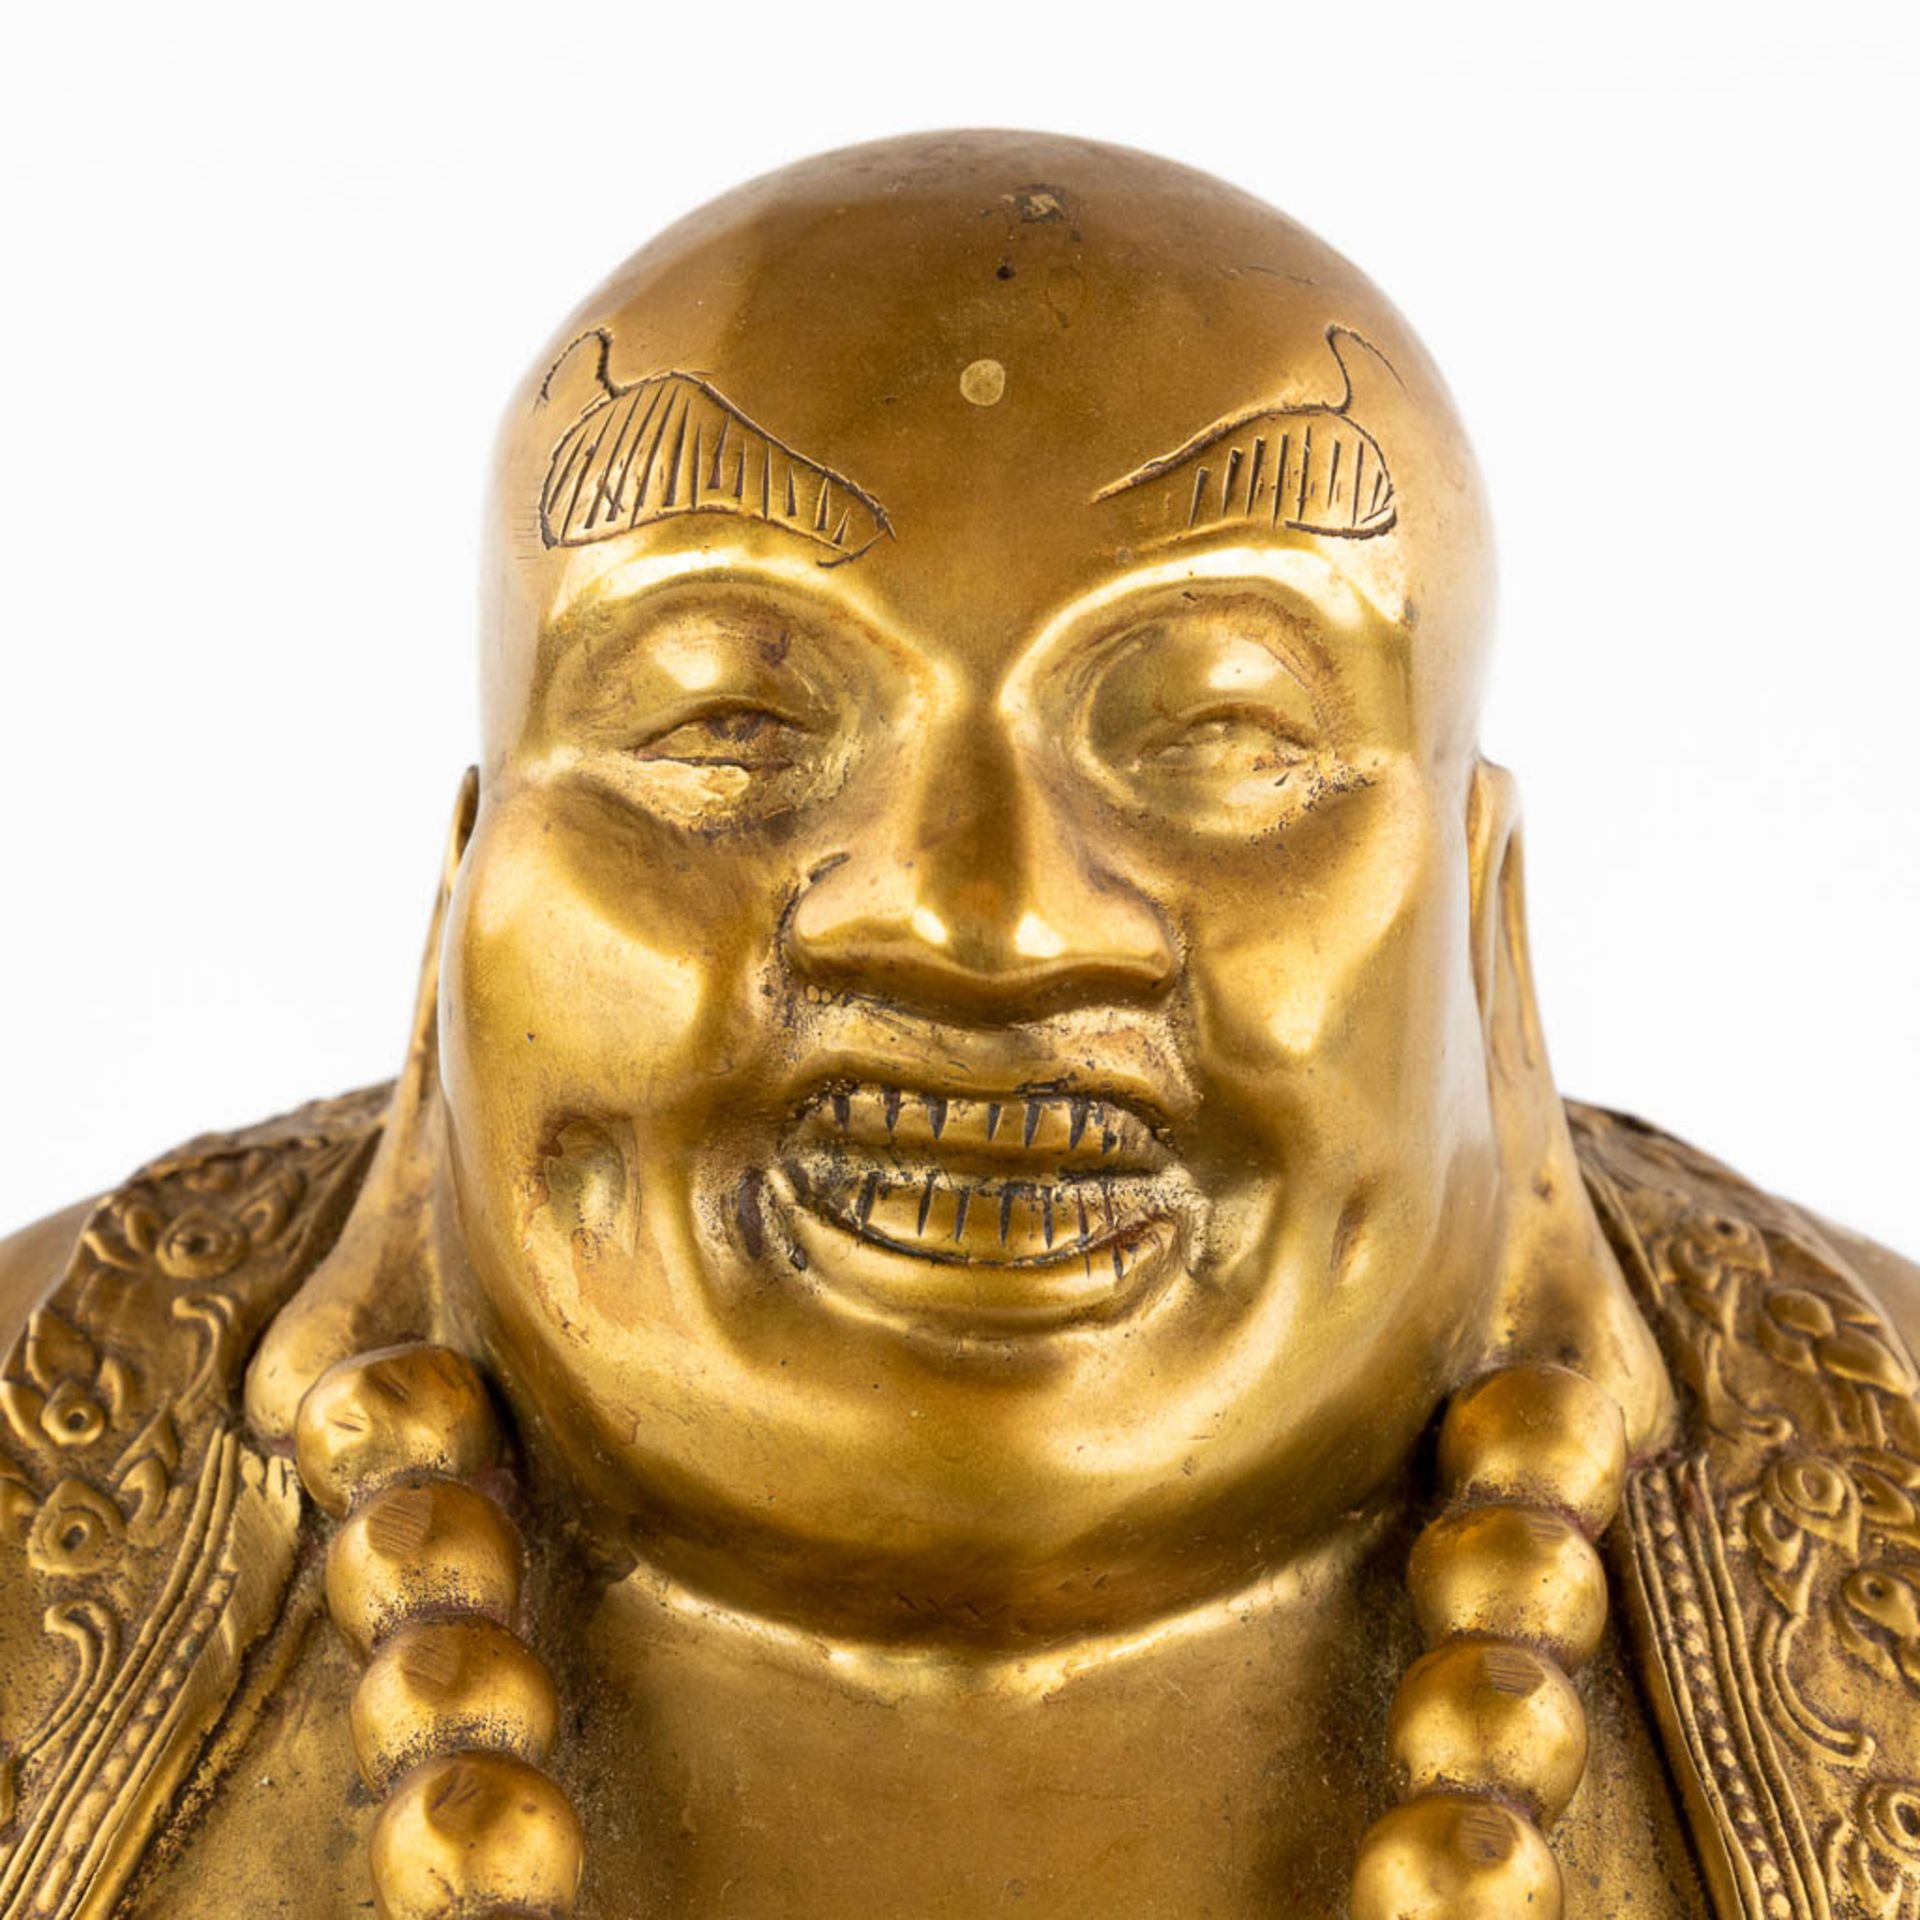 A Chinese laughing buddha, polished bronze. (L:27 x W:27 x H:34 cm) - Image 10 of 11